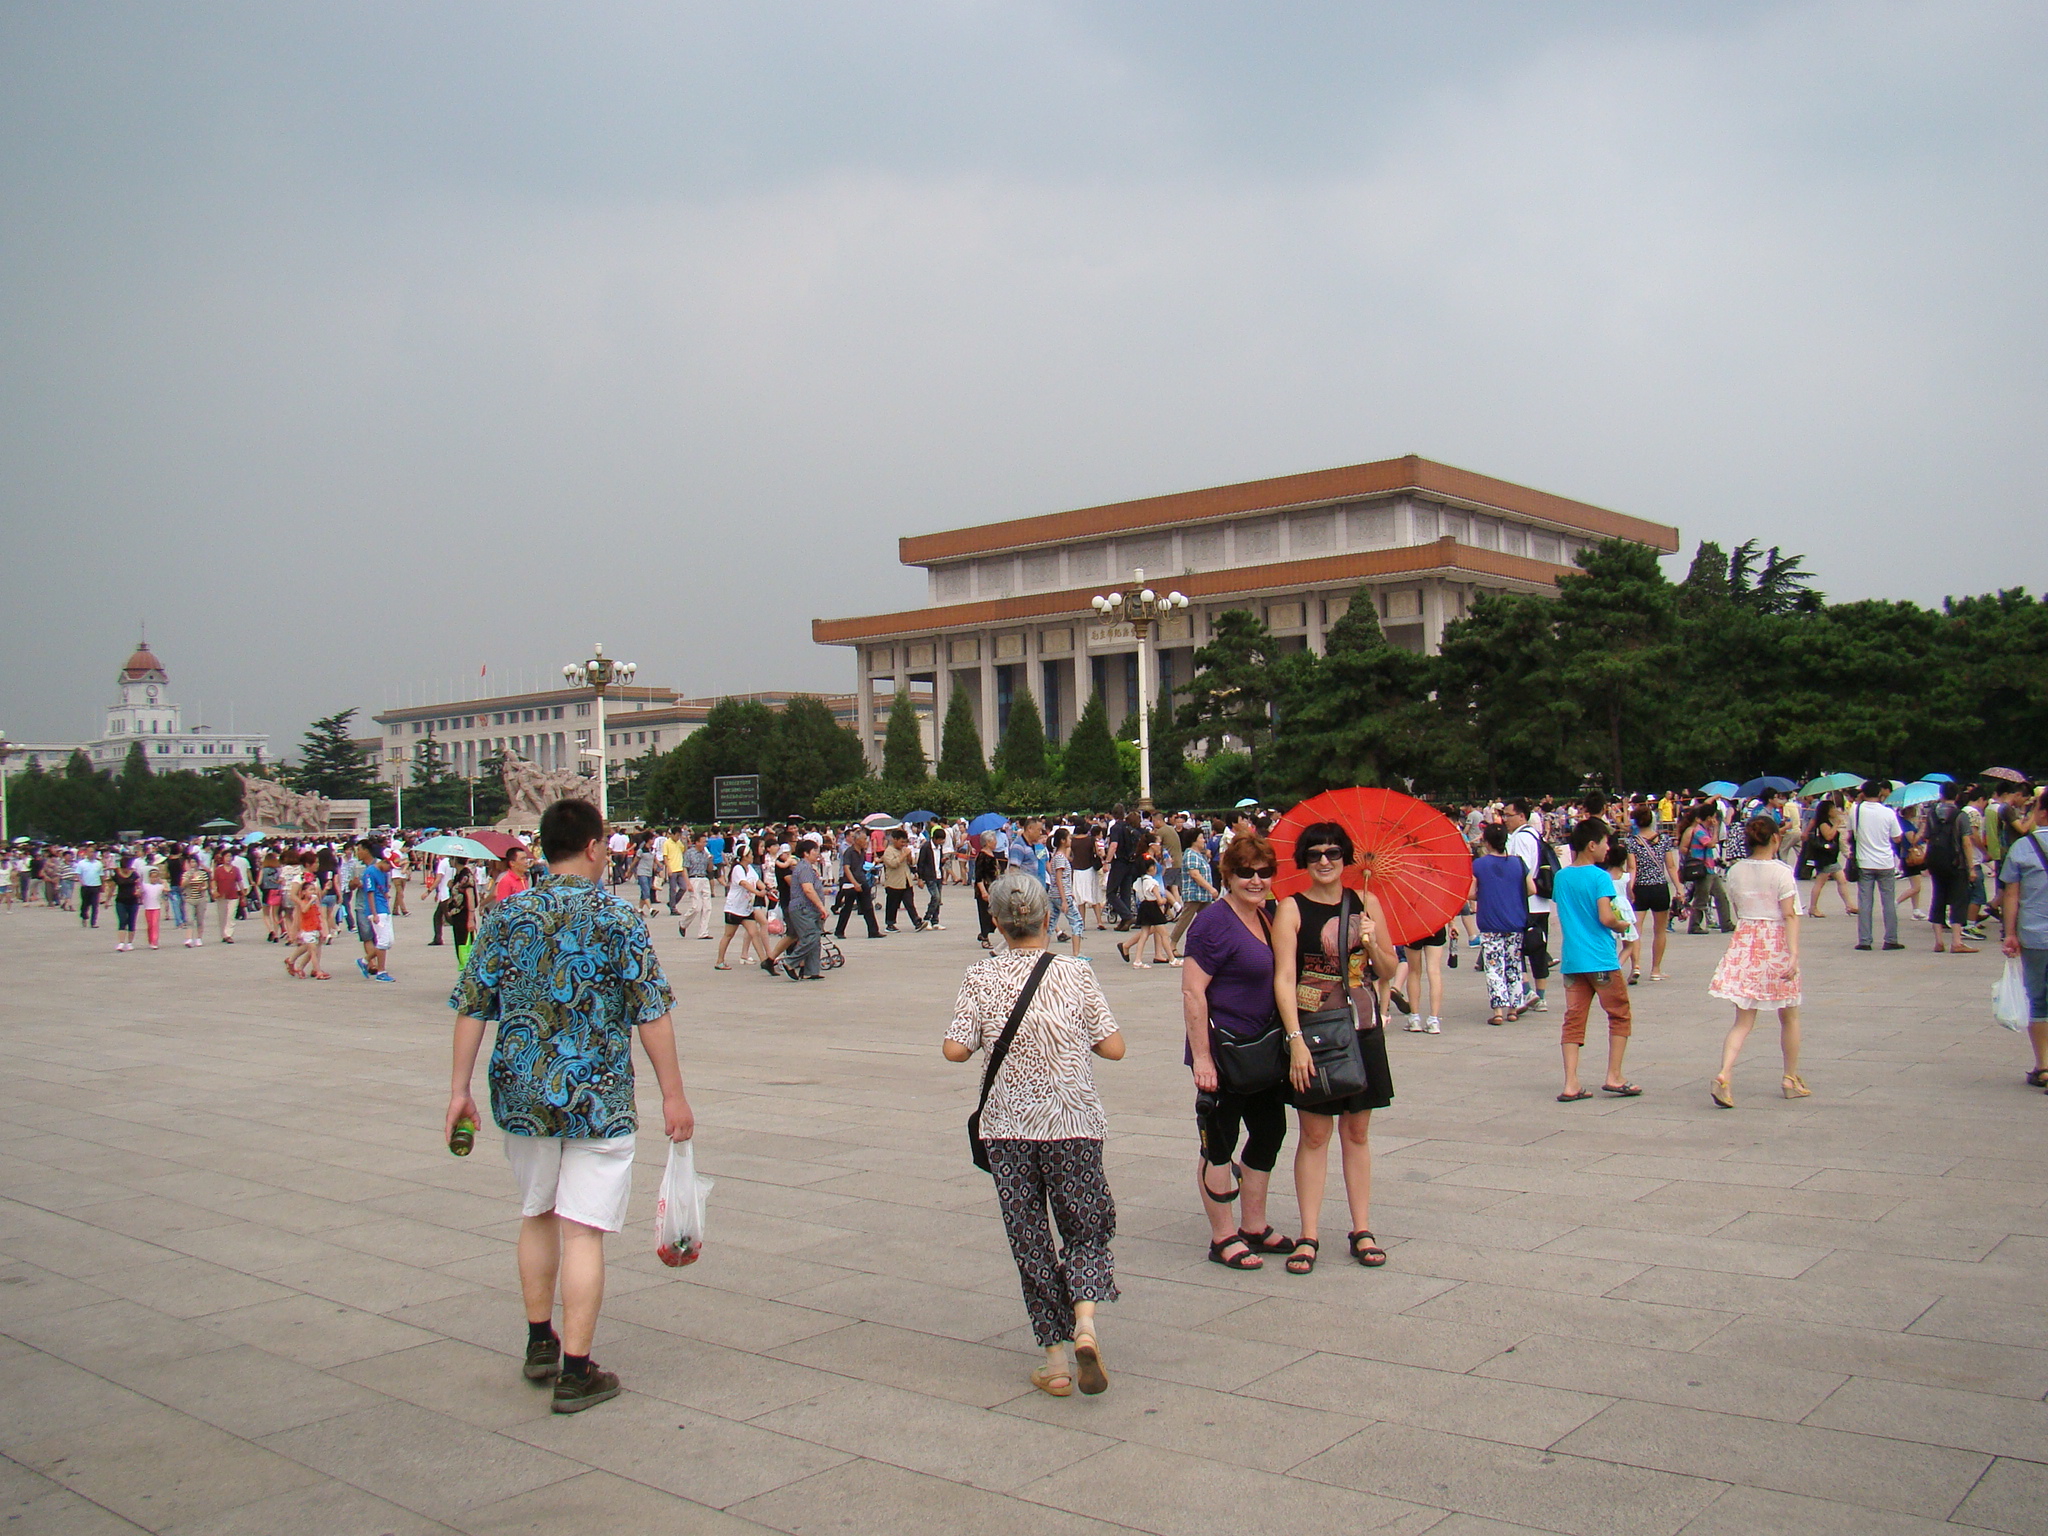 Me and mom stansing on Tiananmen Square with the mausoleum behind us.